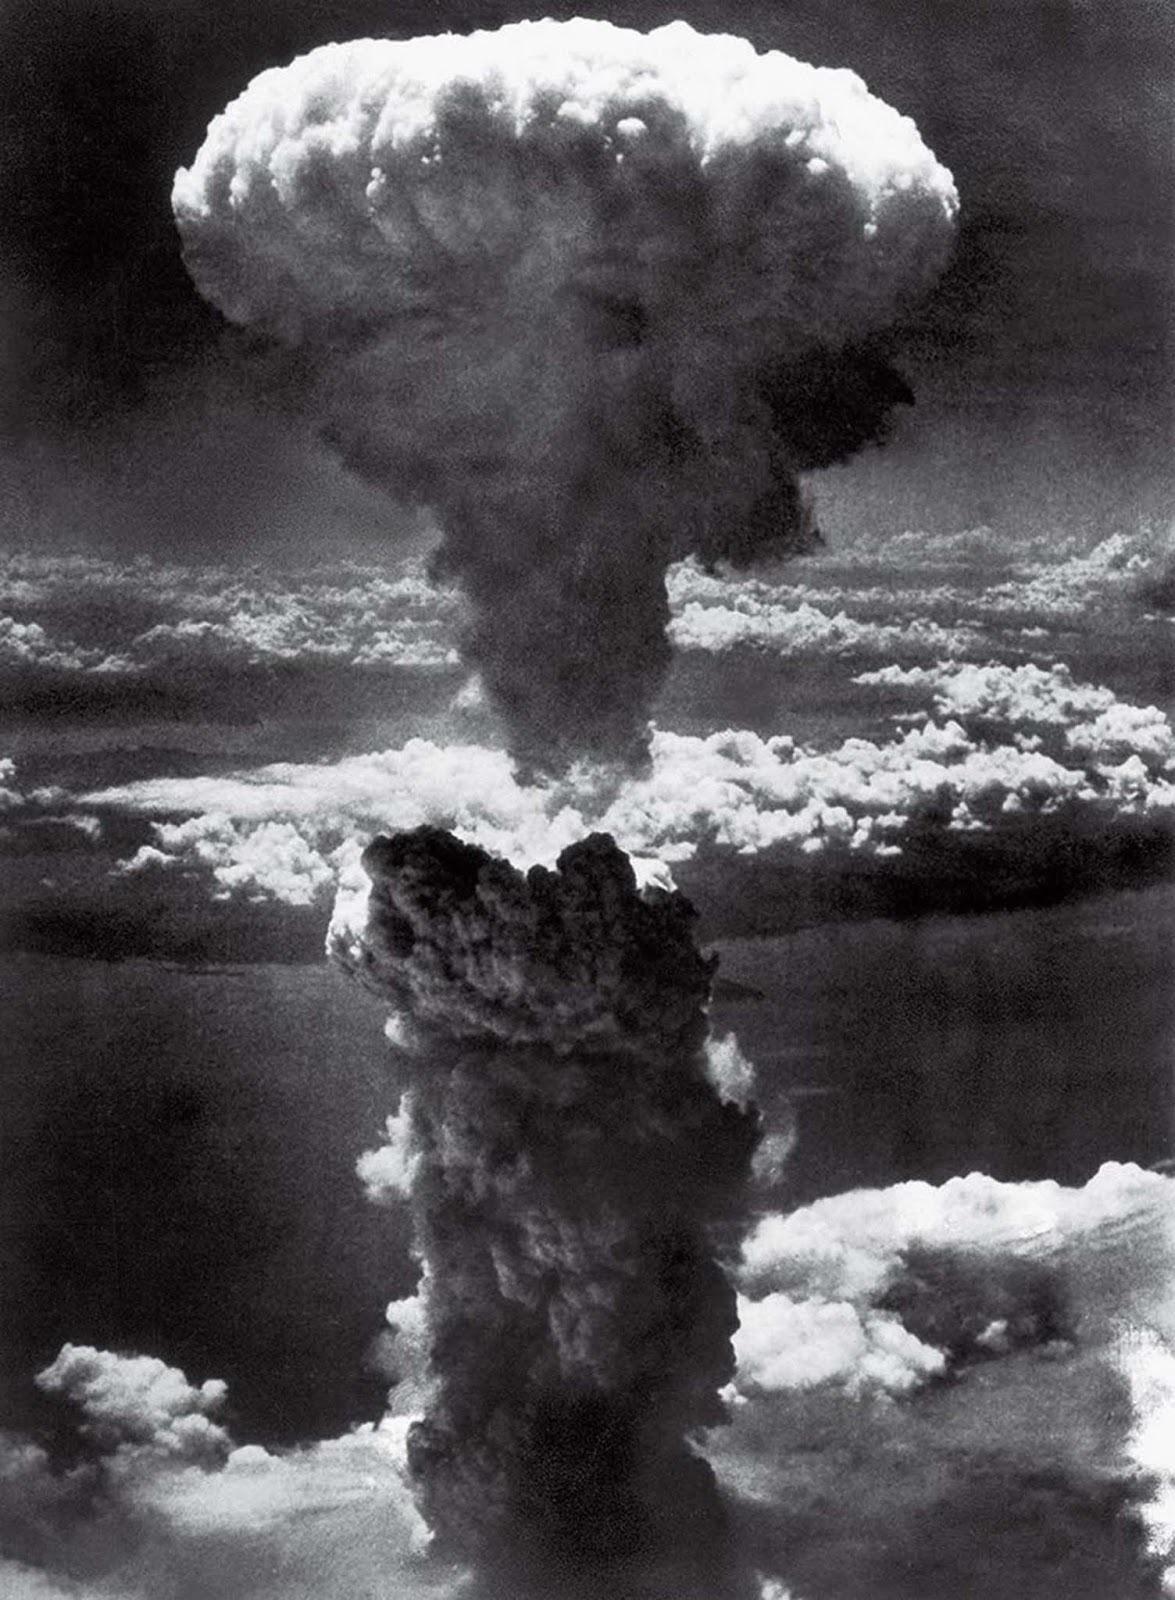 Mushroom cloud over Nagasaki 1945. From the plutonium bomb dubbed “fatman” the cloud would rise to 45,000 ft. 80,000 people would lose their lives in an instant.